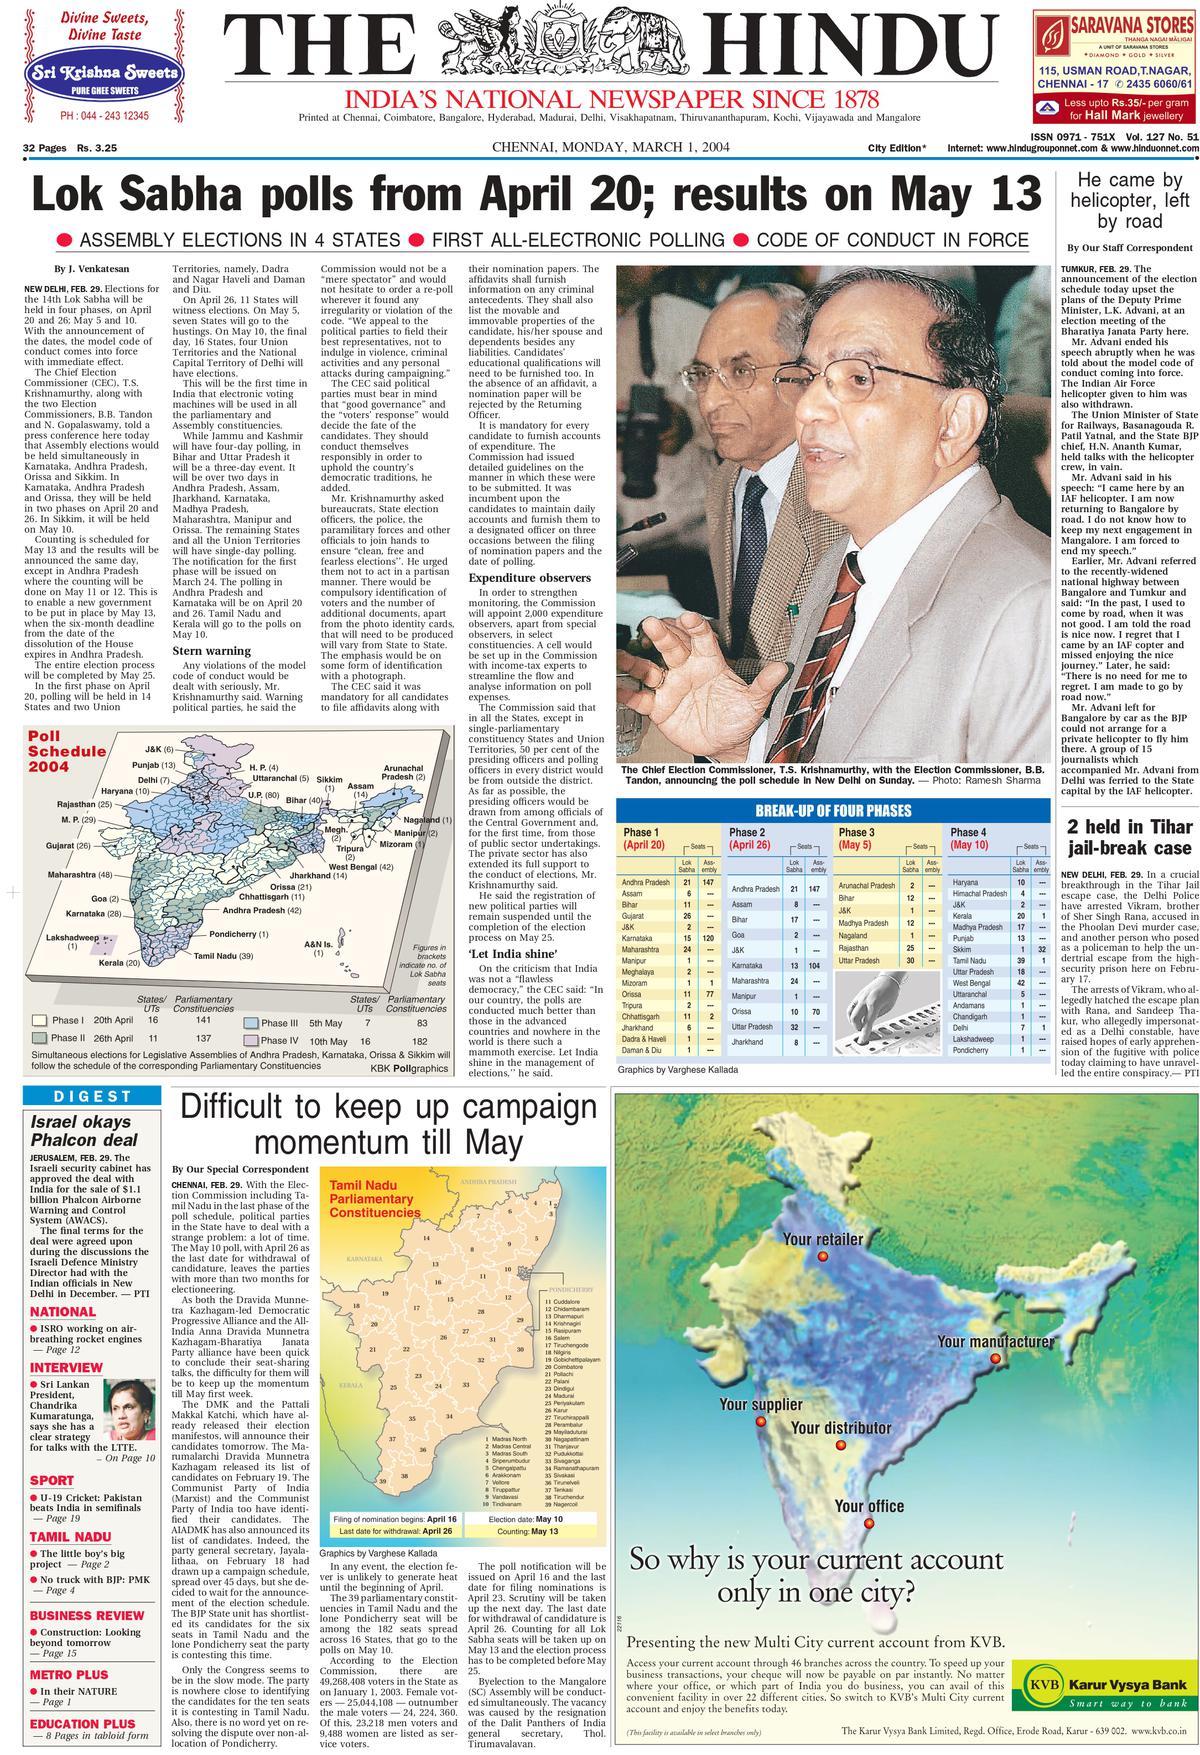 An article outlining the poll schedule, published on March 1, 2004.